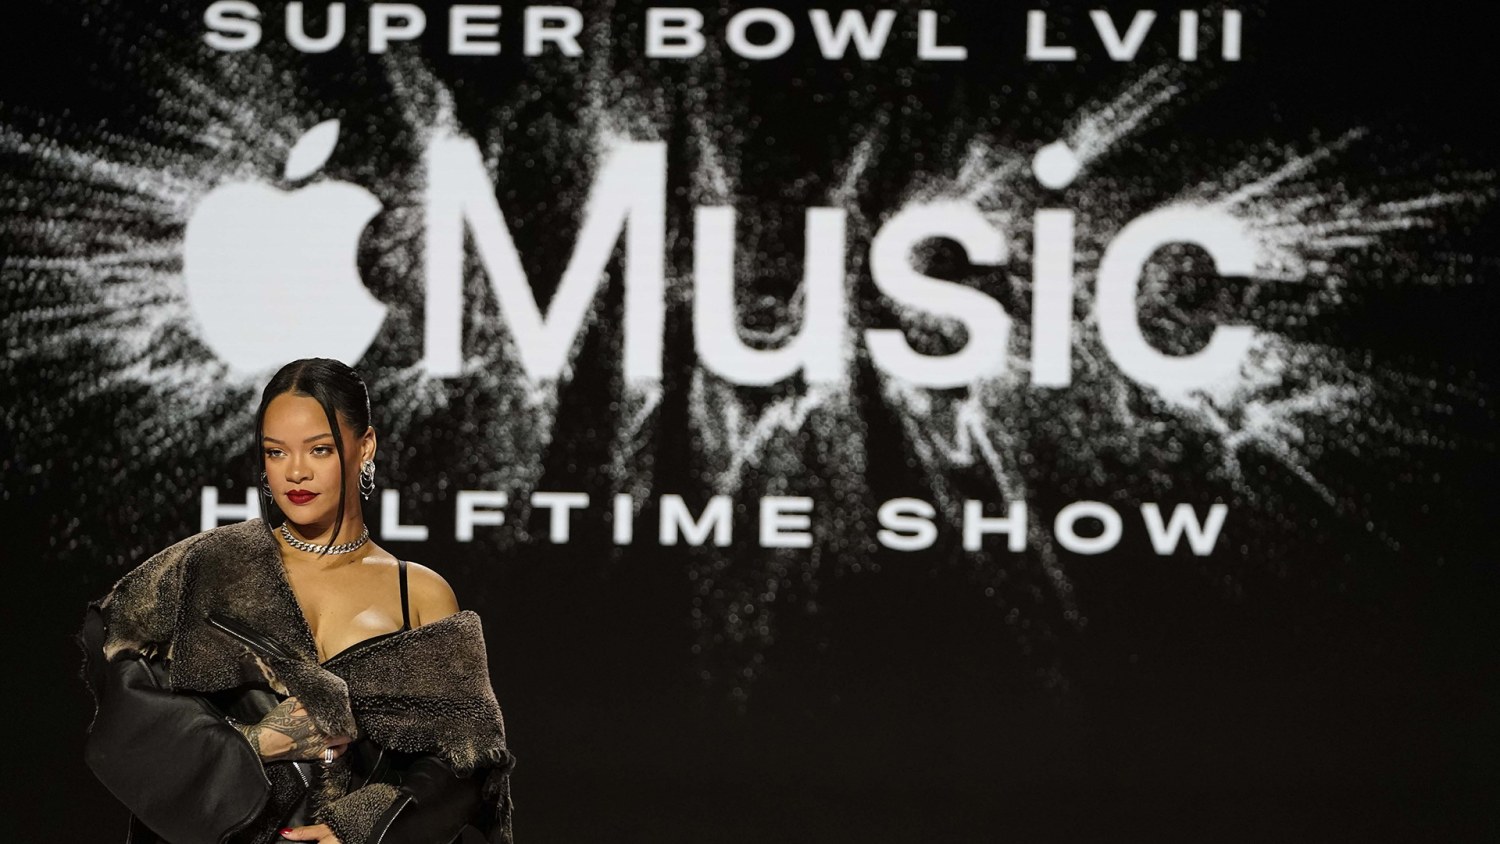 Review: Rihanna fumbled her Super Bowl halftime show, rushing through  snippets of 13 songs in 13 minutes - The San Diego Union-Tribune